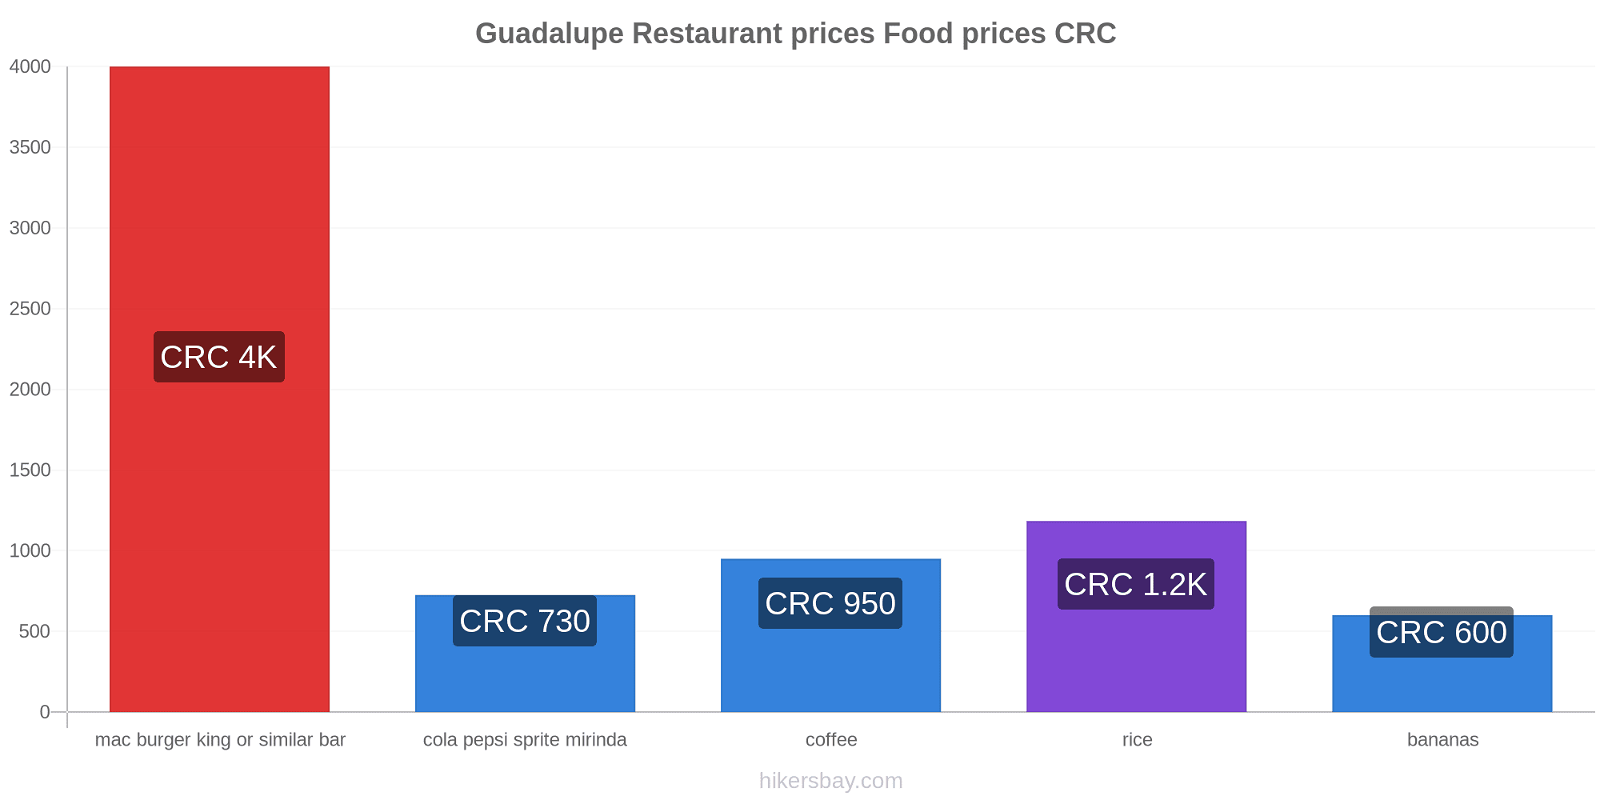 Guadalupe price changes hikersbay.com